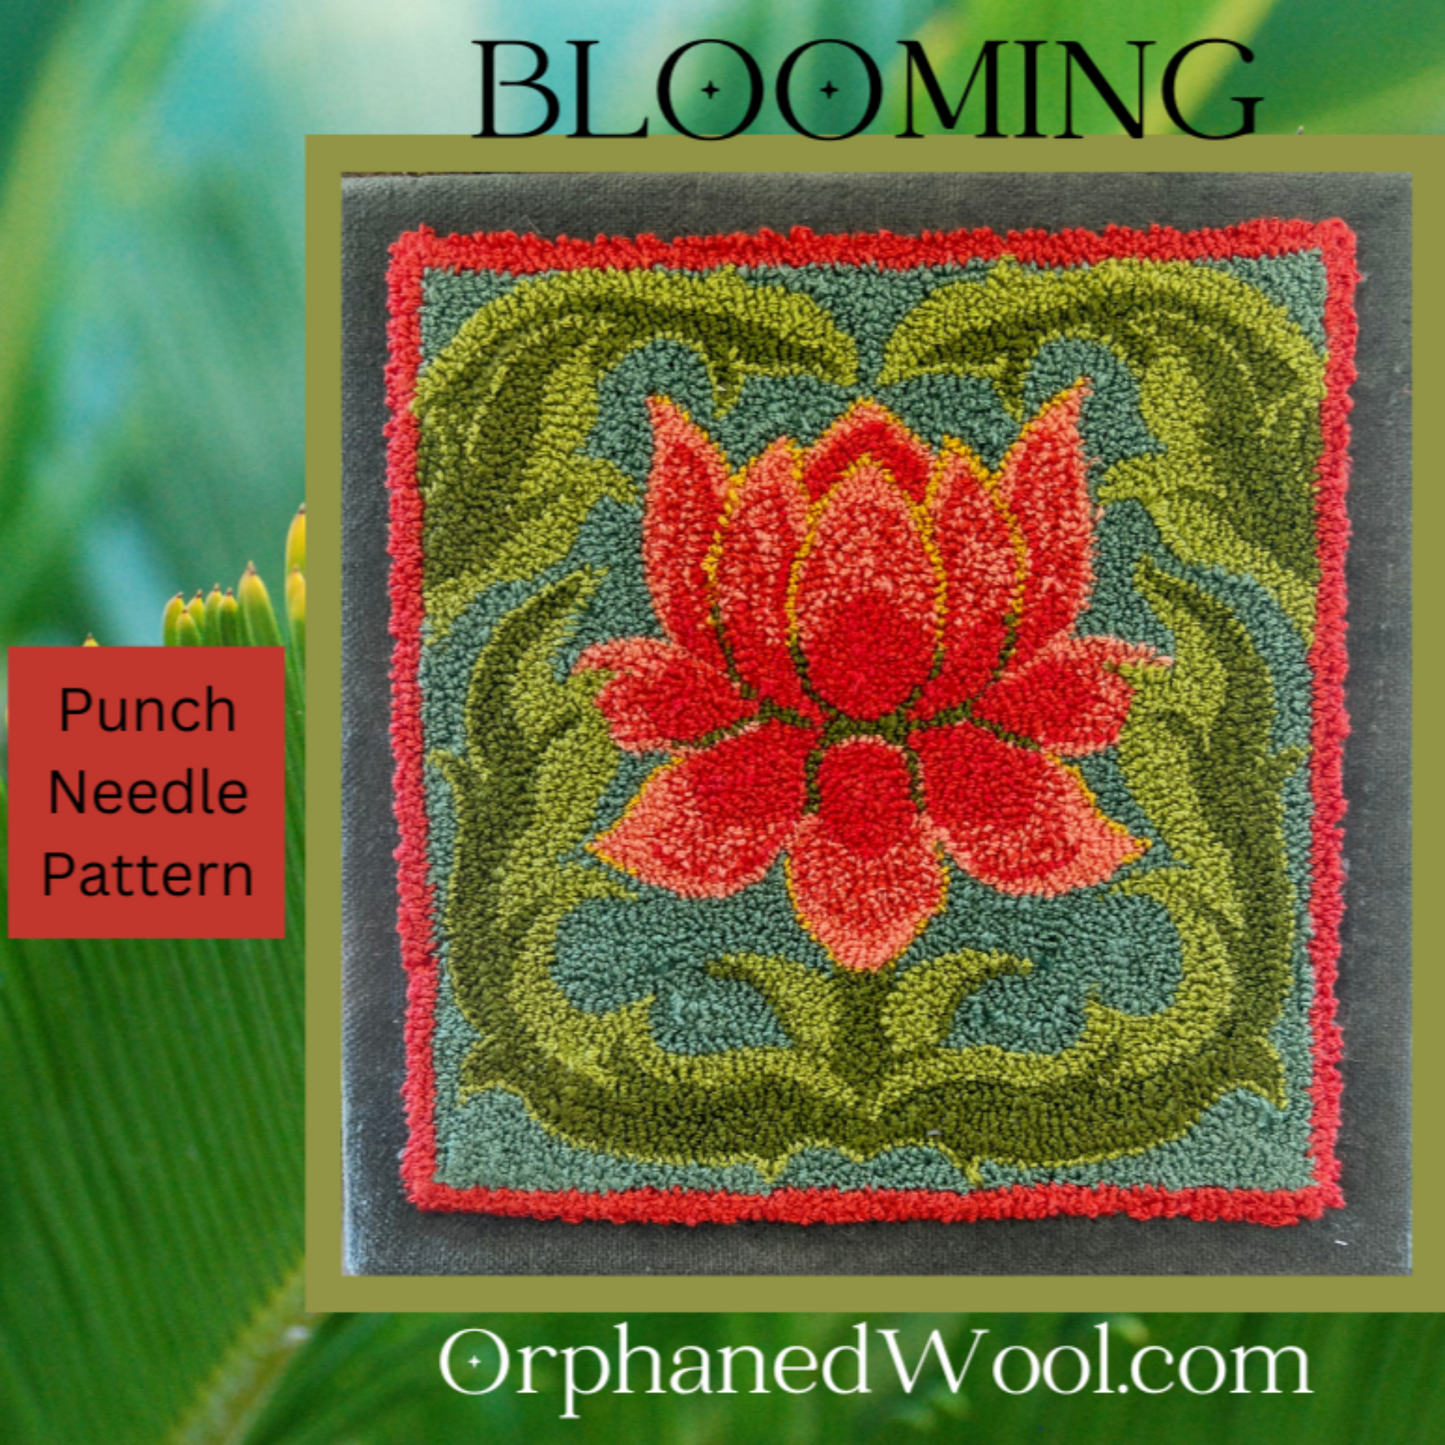  Blooming-Punch Needle Pattern With DMC Floss thread kit, available as a Paper or Cloth Pattern by Orphaned Wool.